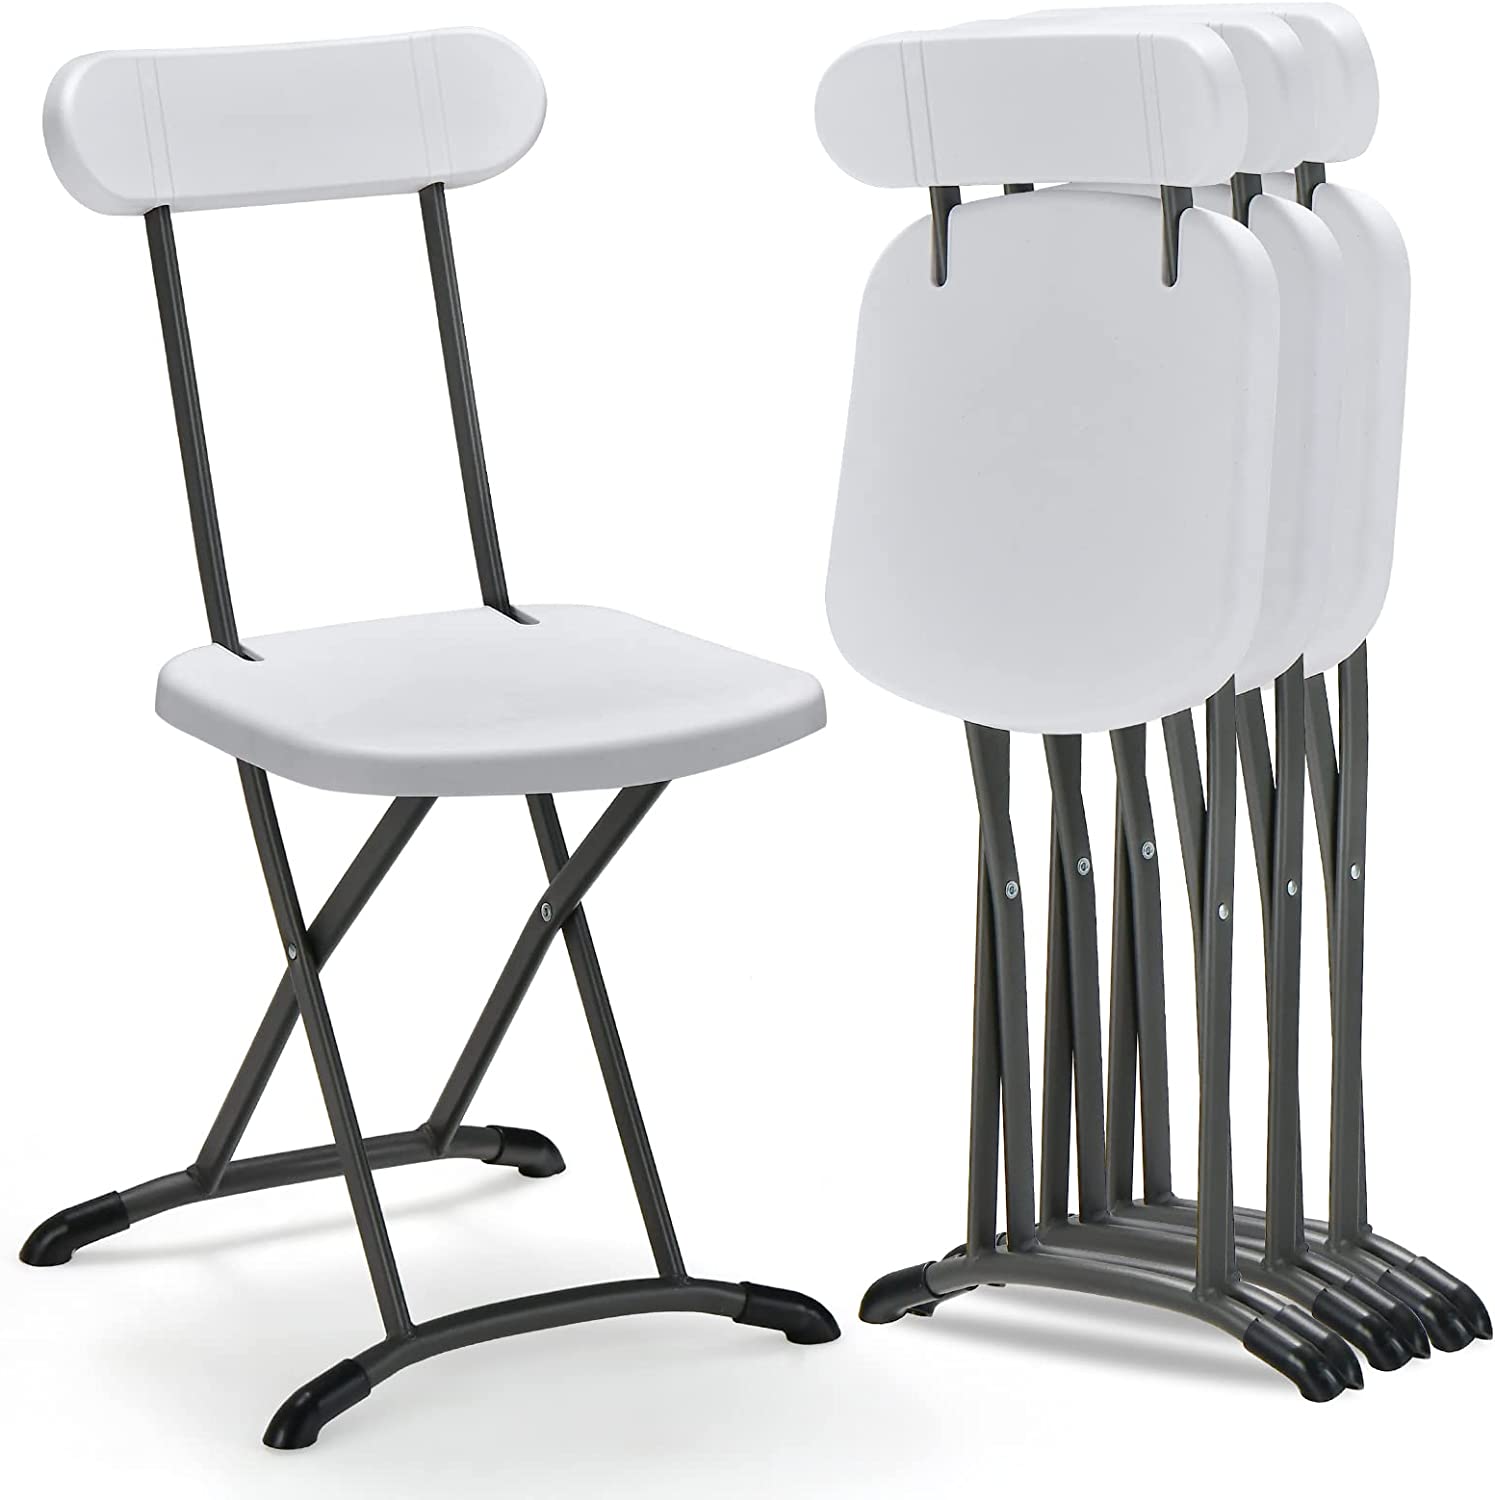 Giantex 2-Pack Folding Chairs, Plastic Event Chairs, Lightweight Foldable Chairs with Solid X-Shape Frame